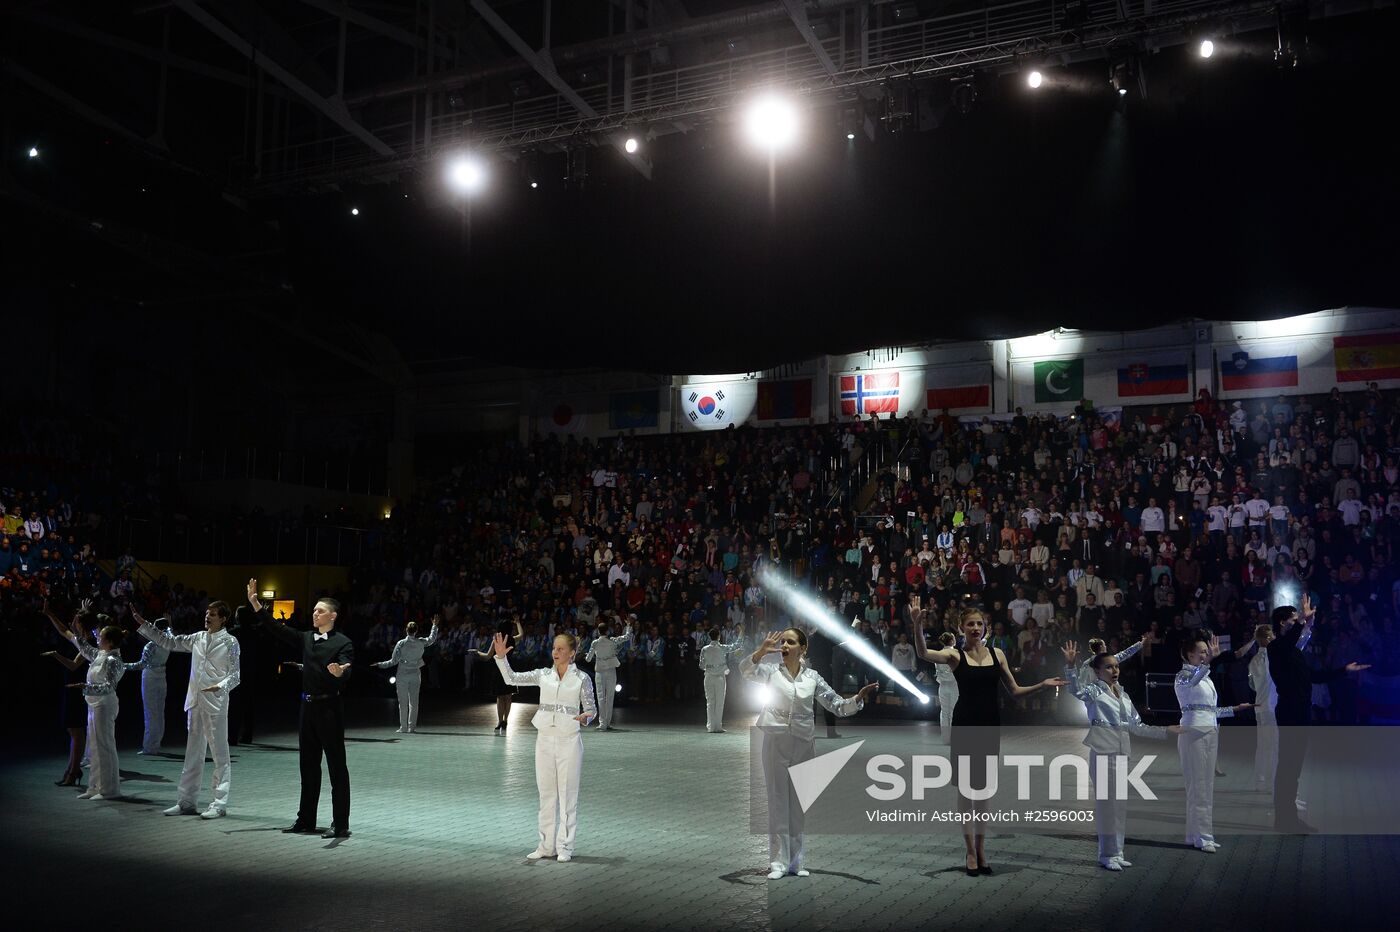 2015 Deaflympics opening ceremony